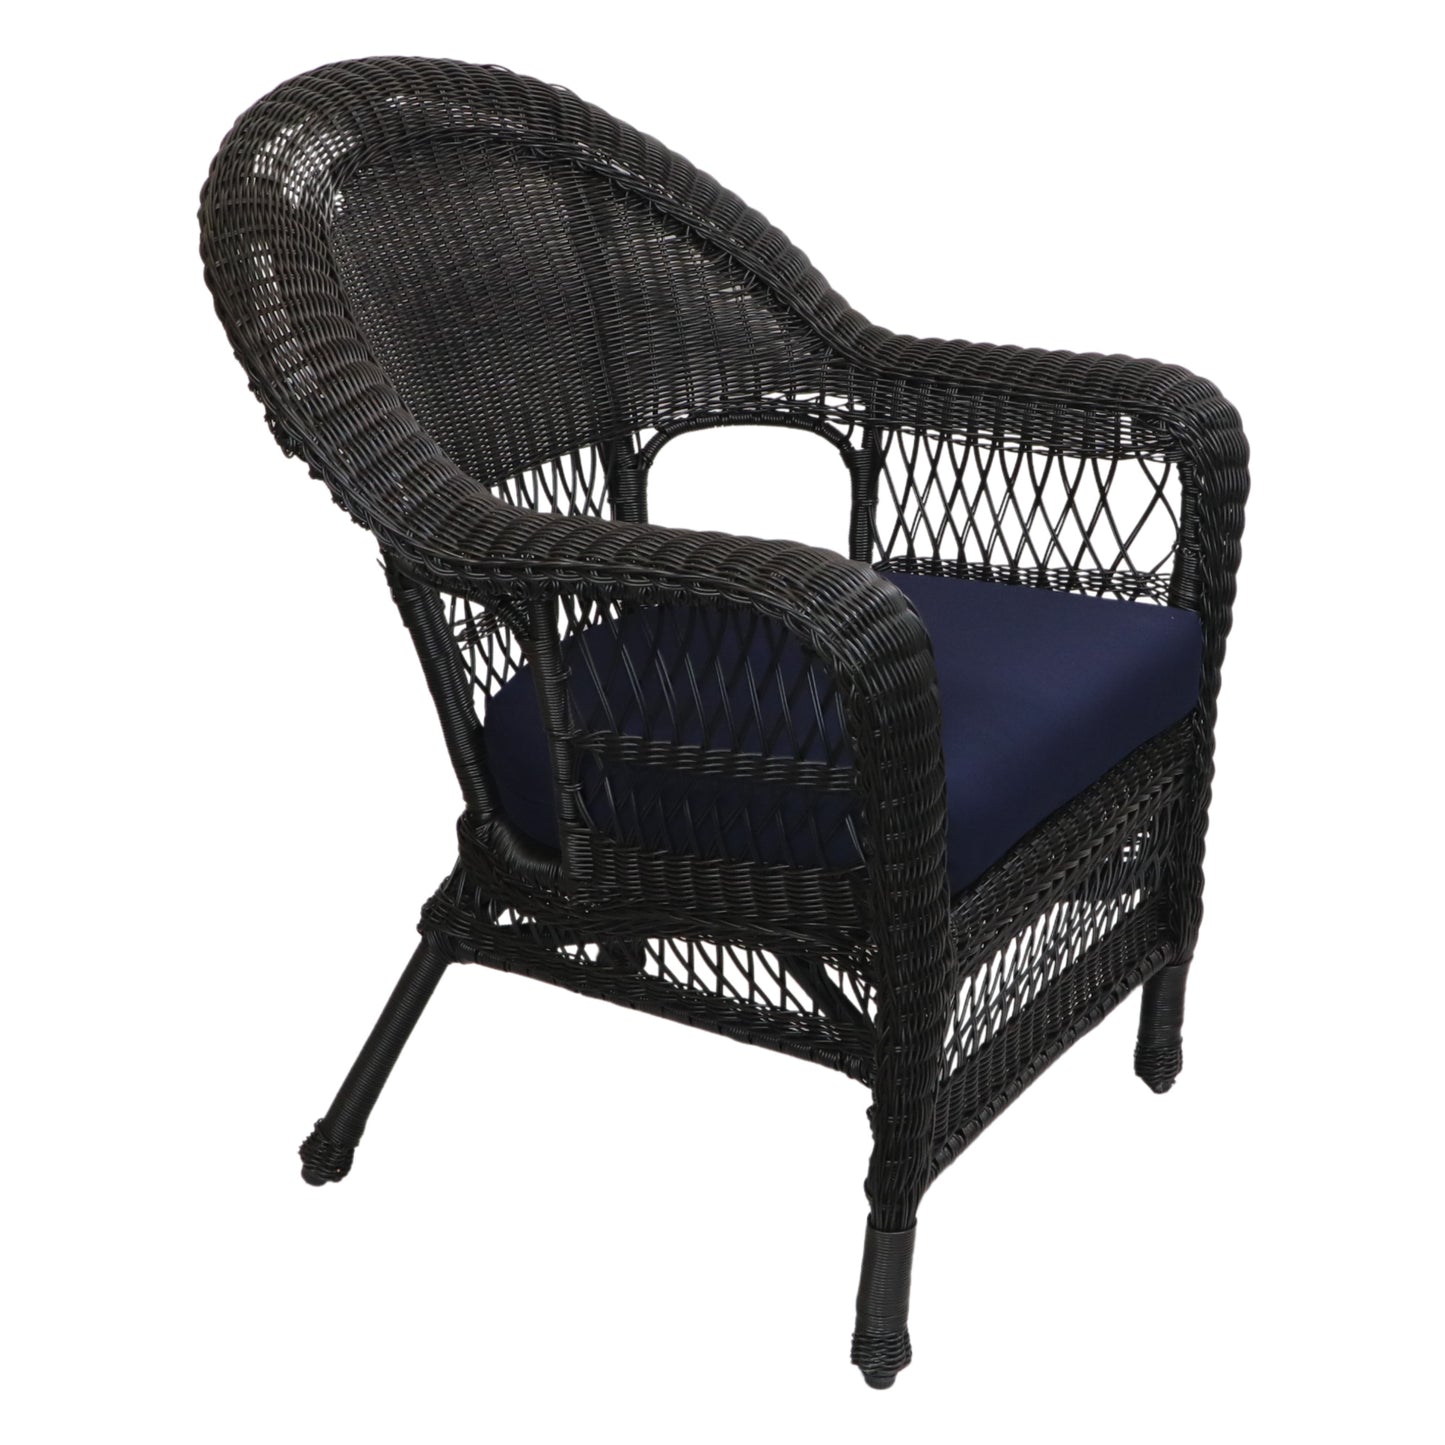 Freeport Porch Chair with Cushion